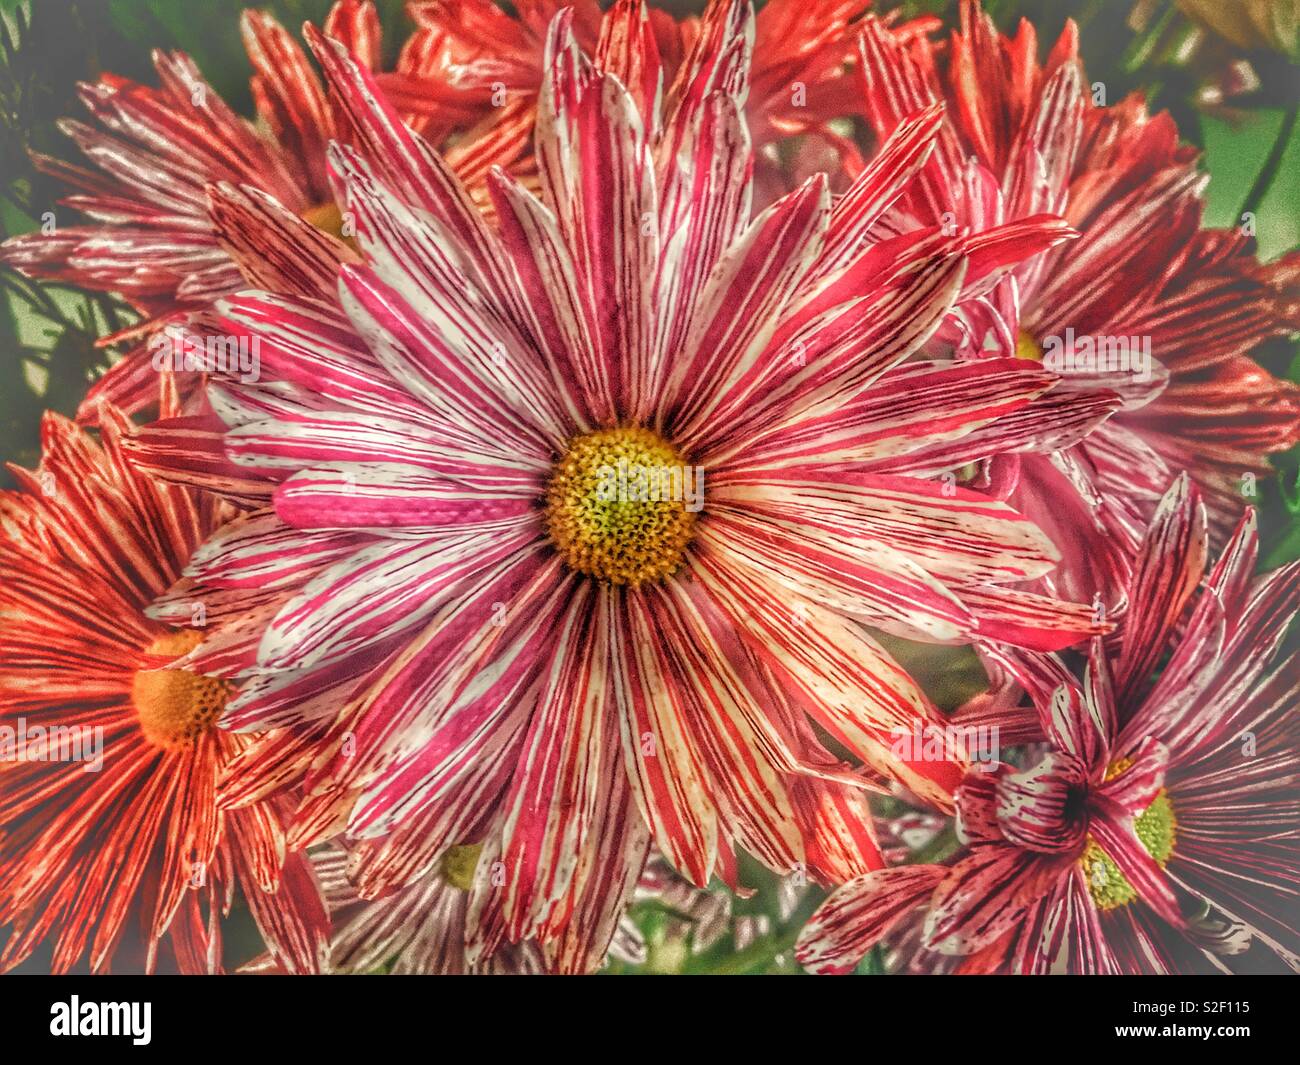 Red and white chrysanthemum flower rays of colour spreading out from a central disc Stock Photo